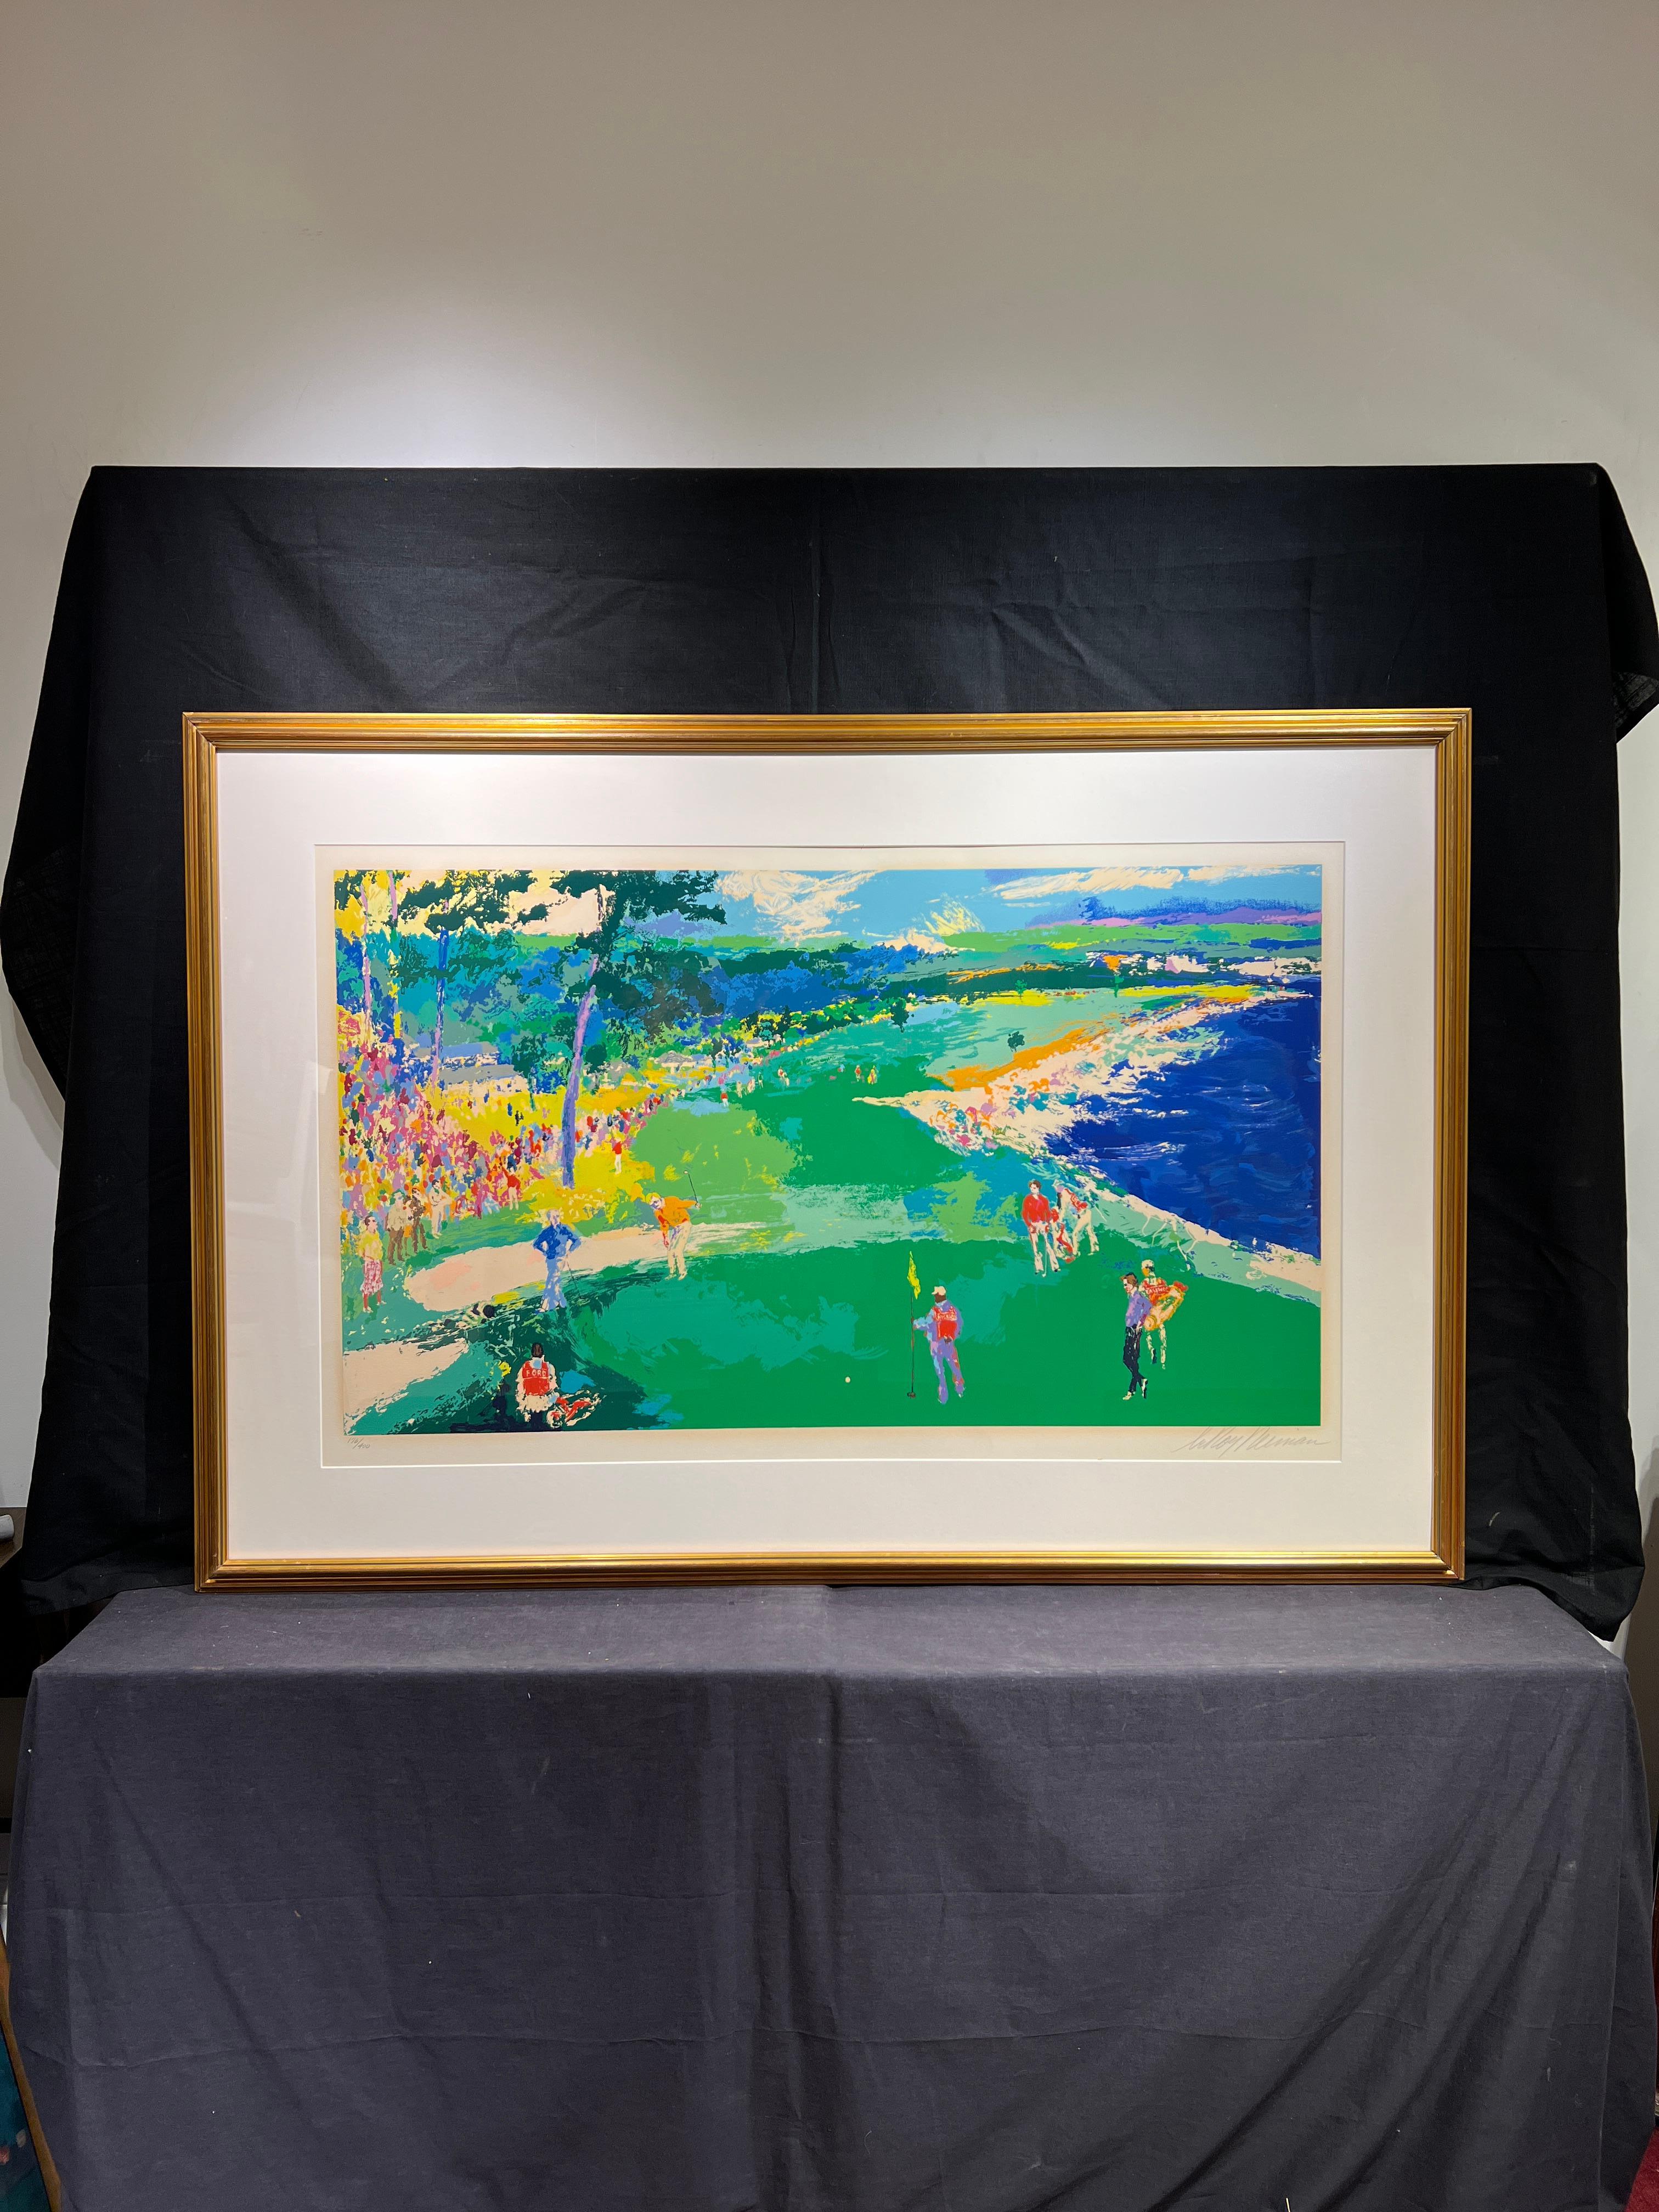 The 18th at Pebble Beach - American Modern Print by Leroy Neiman